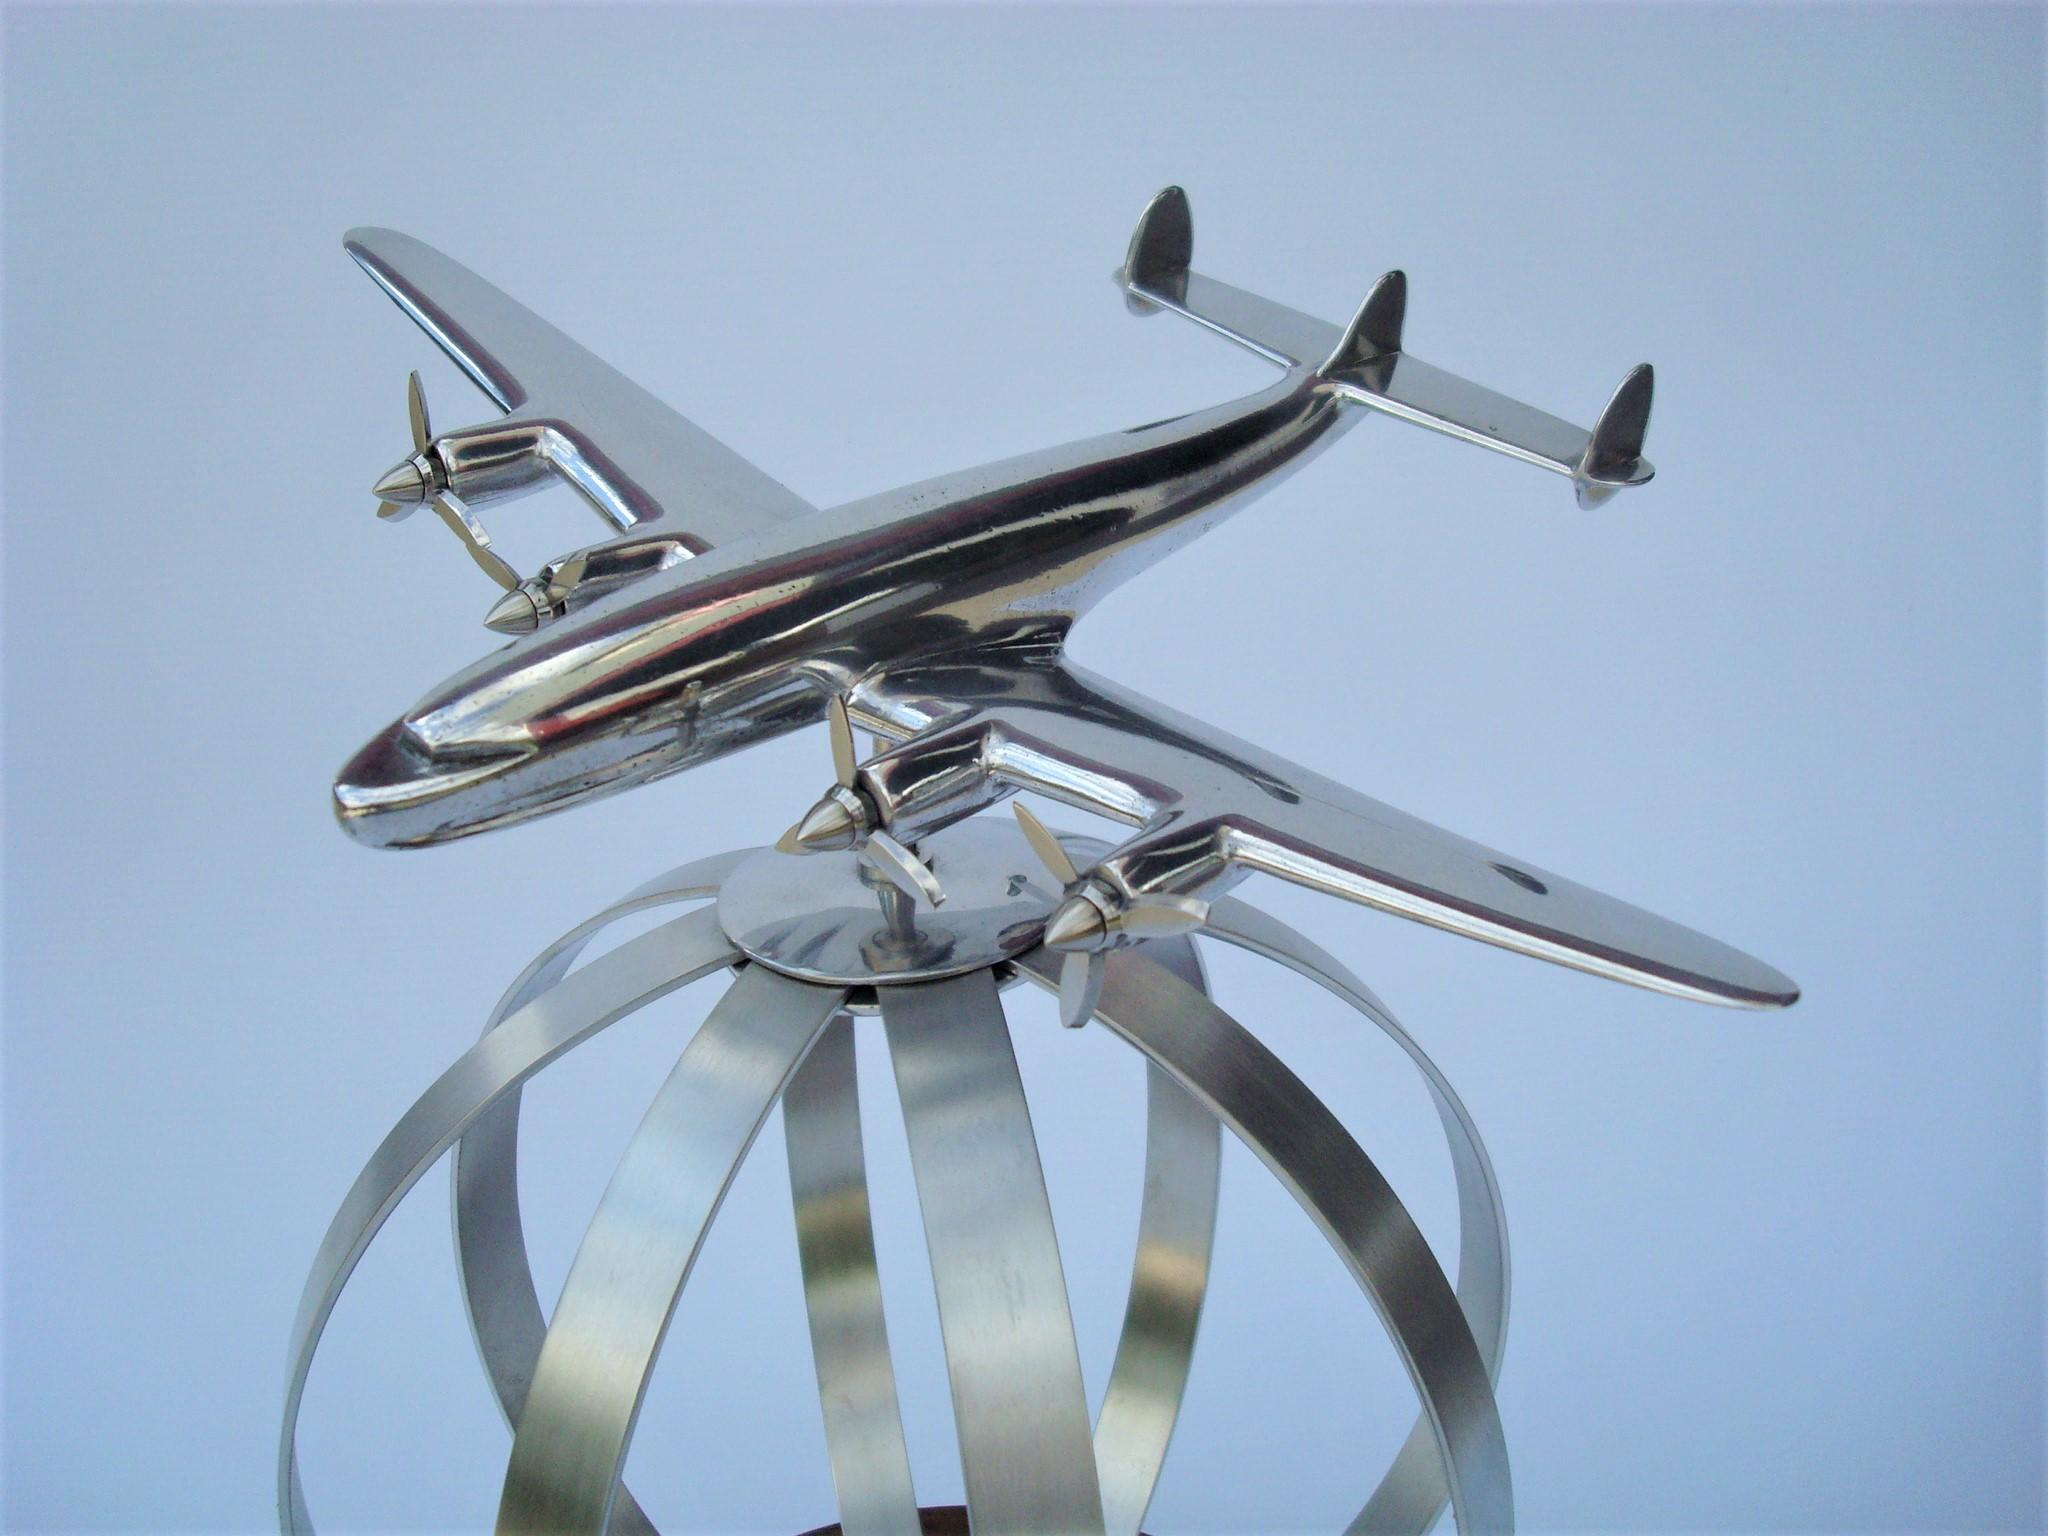 Aviation Lockheed Constellation vintage aluminium desk top display airplane model. The model has movement, you can change the position of the airplane. It has a mixture of Art Deco and midcentury design. Excellent restored conditions.

The